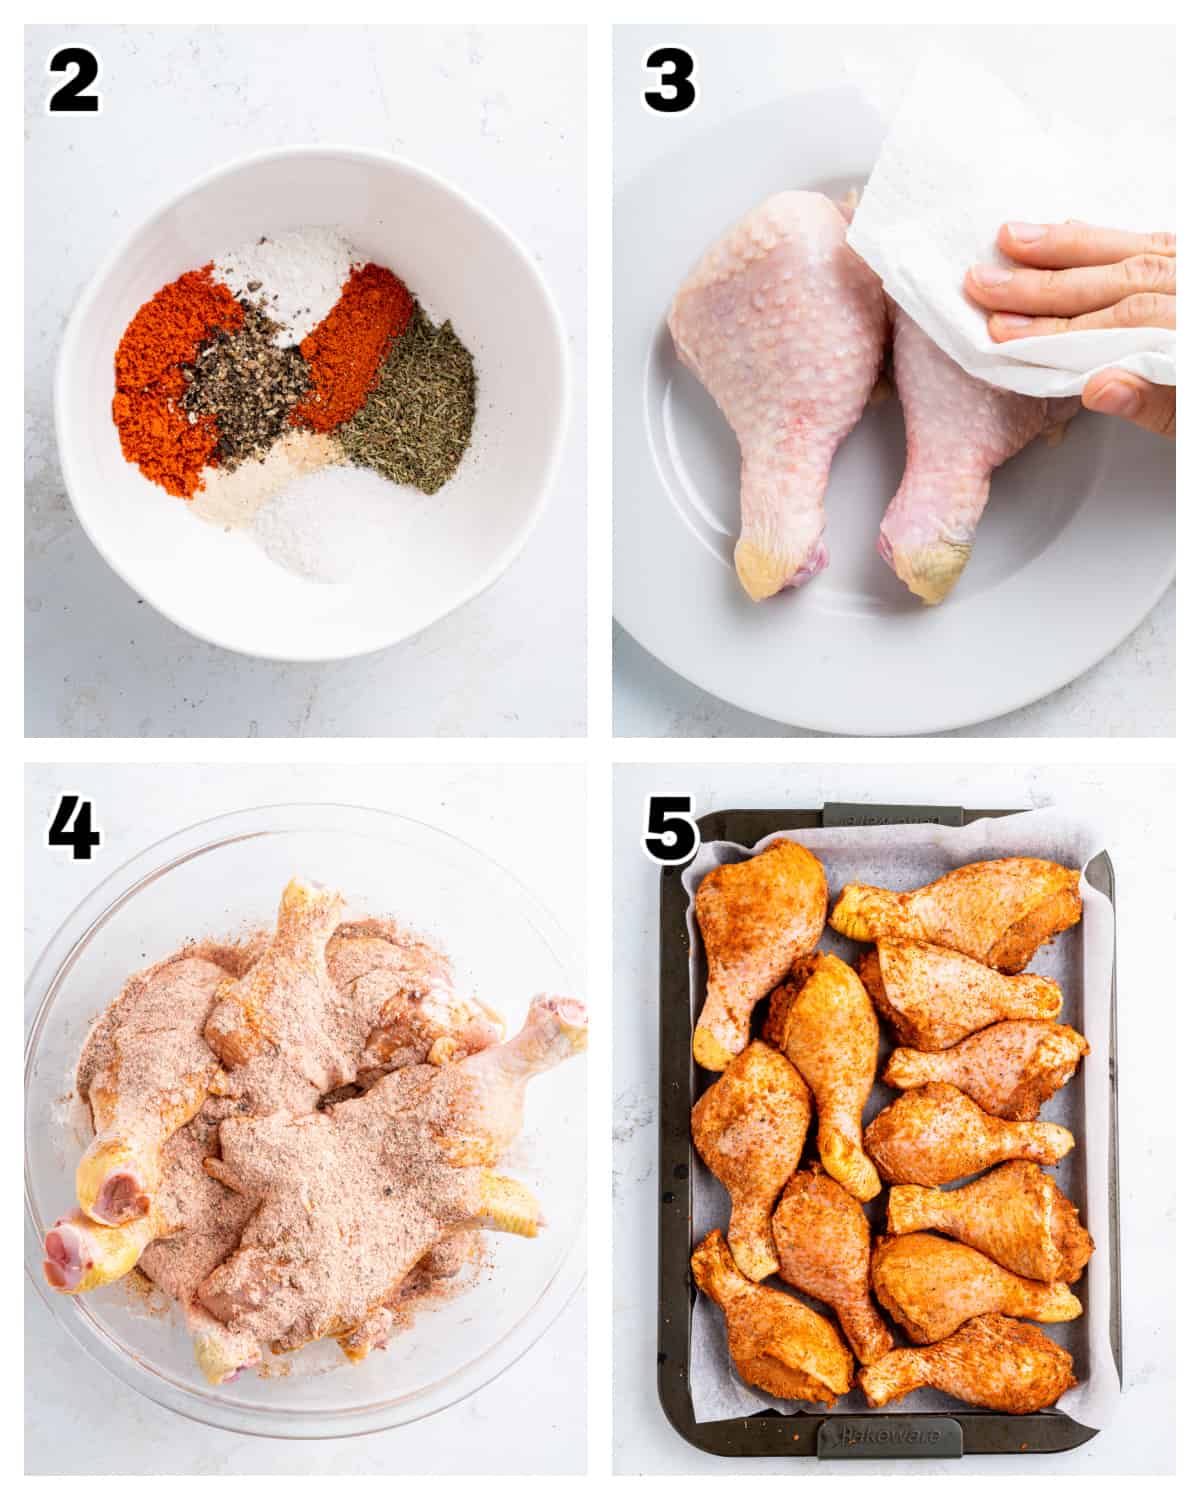 food, with Baked BBQ Chicken Legs